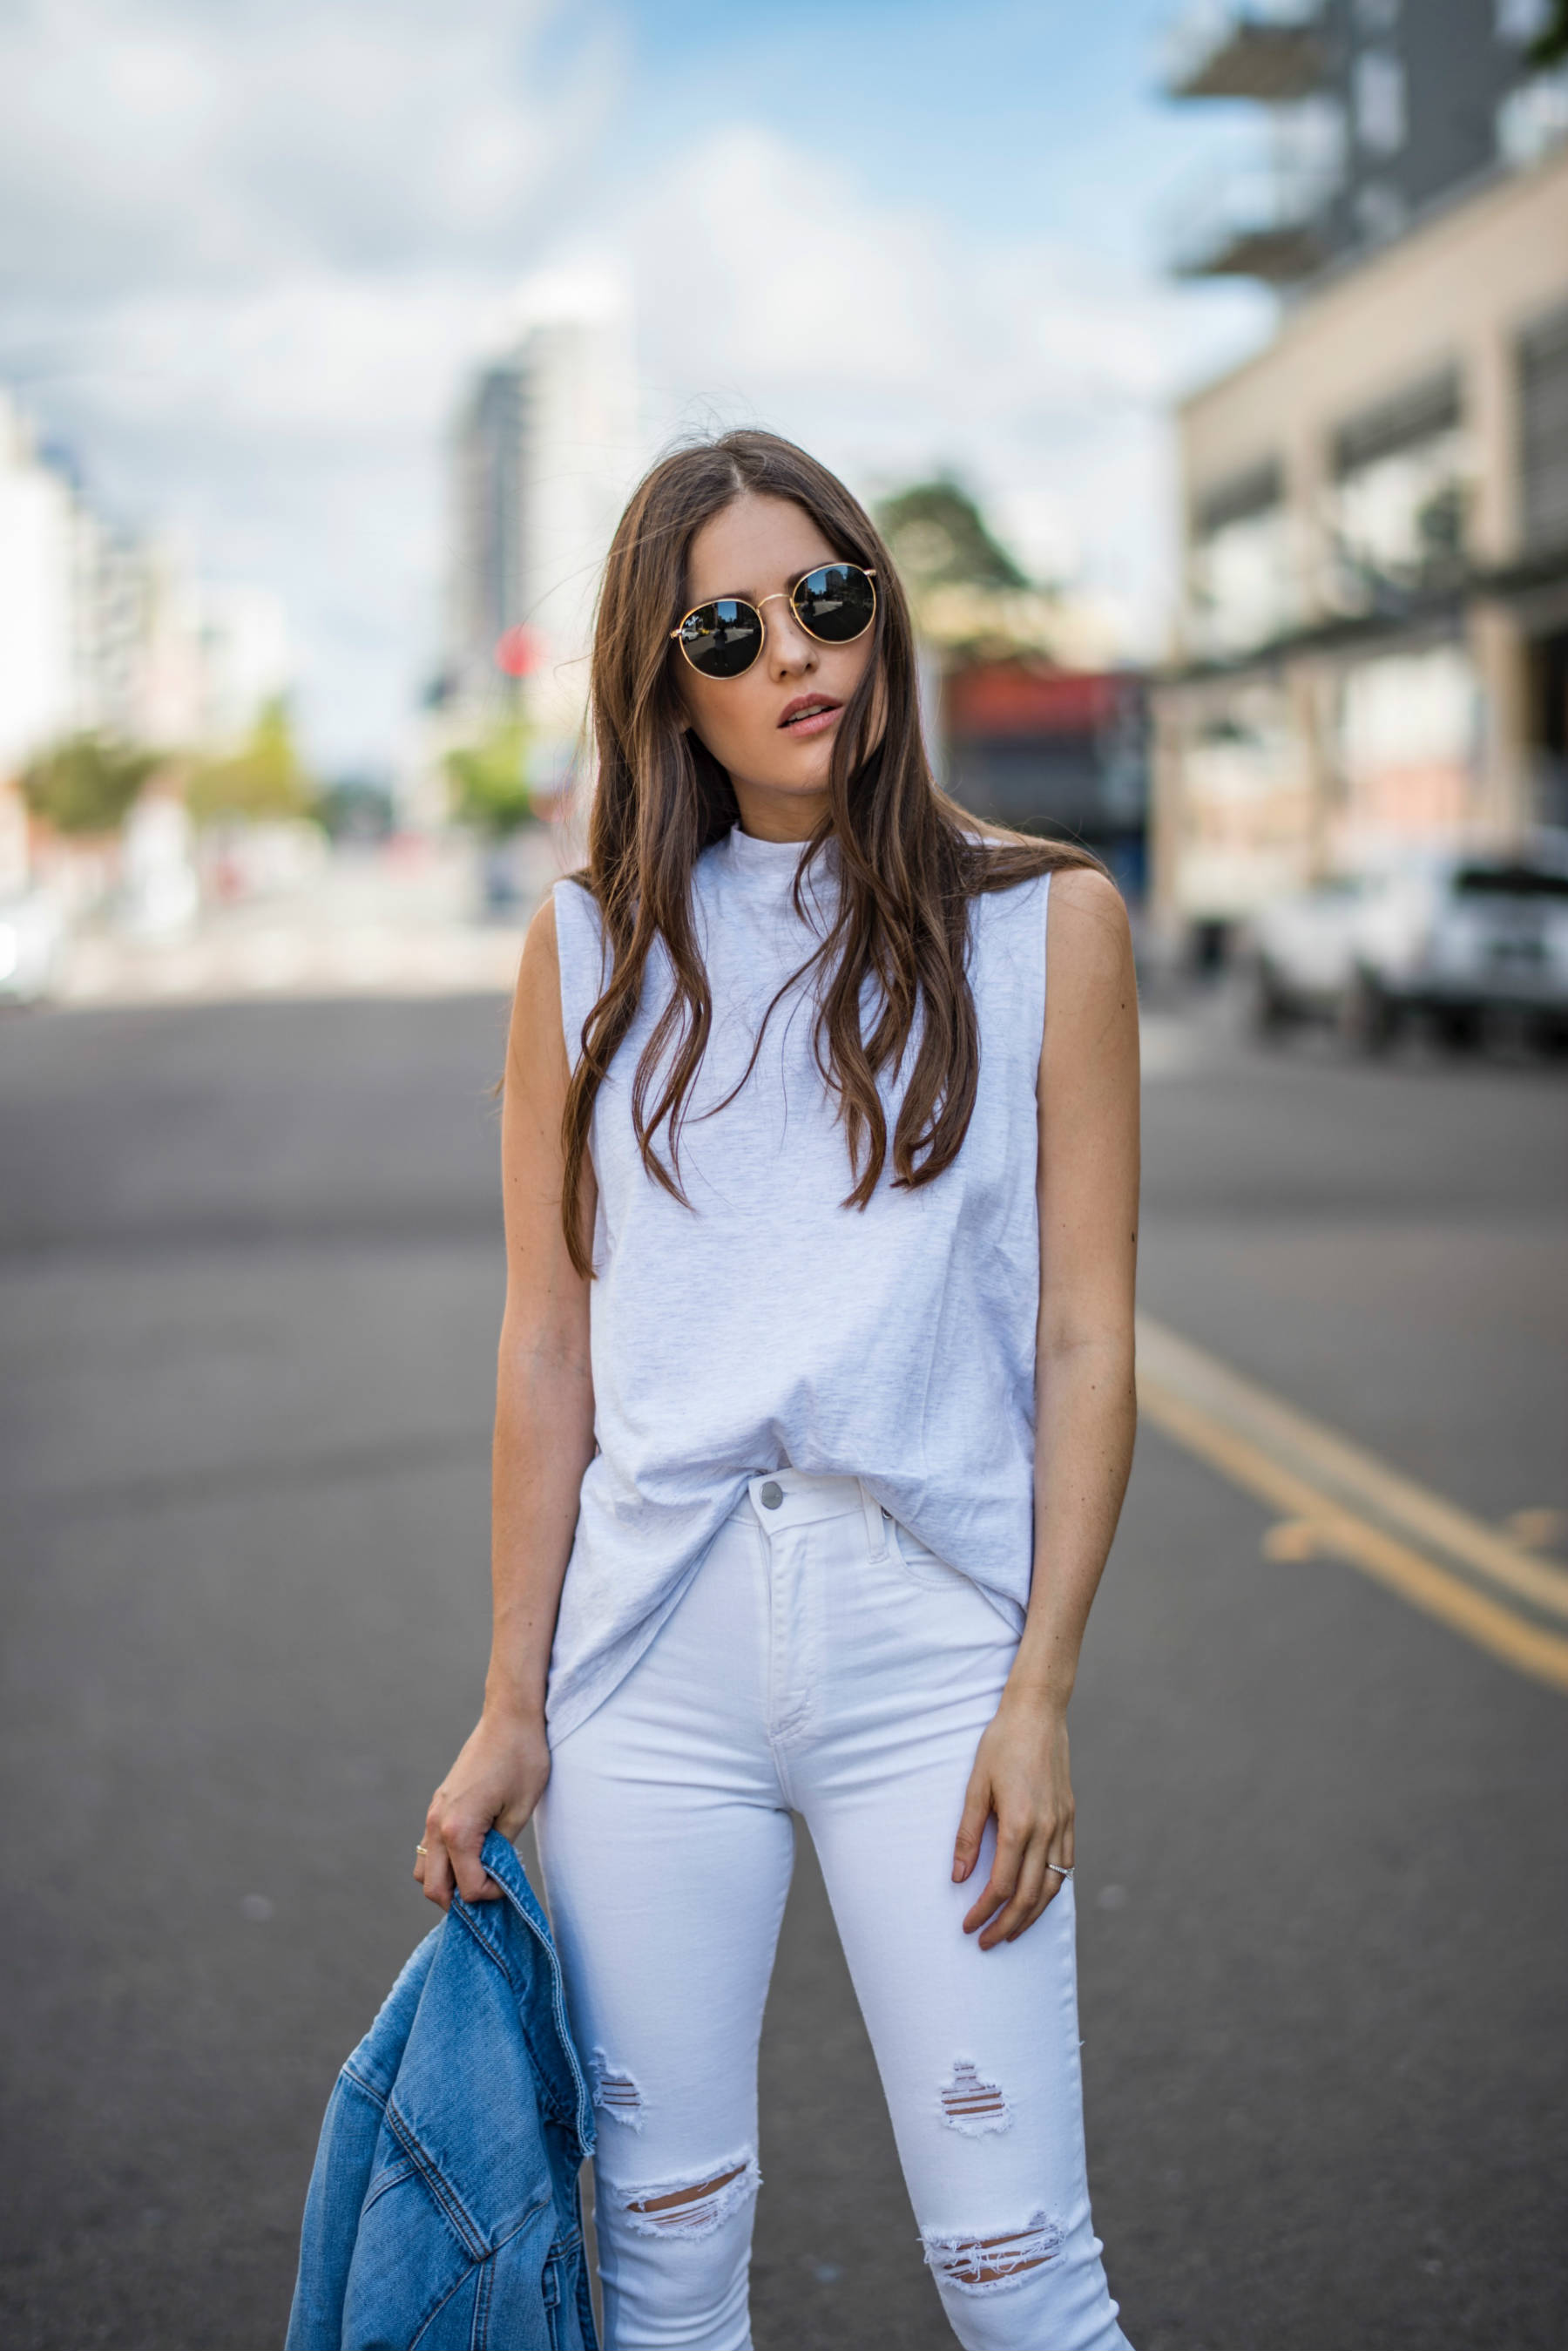 How to Wear White Jeans After the Summer